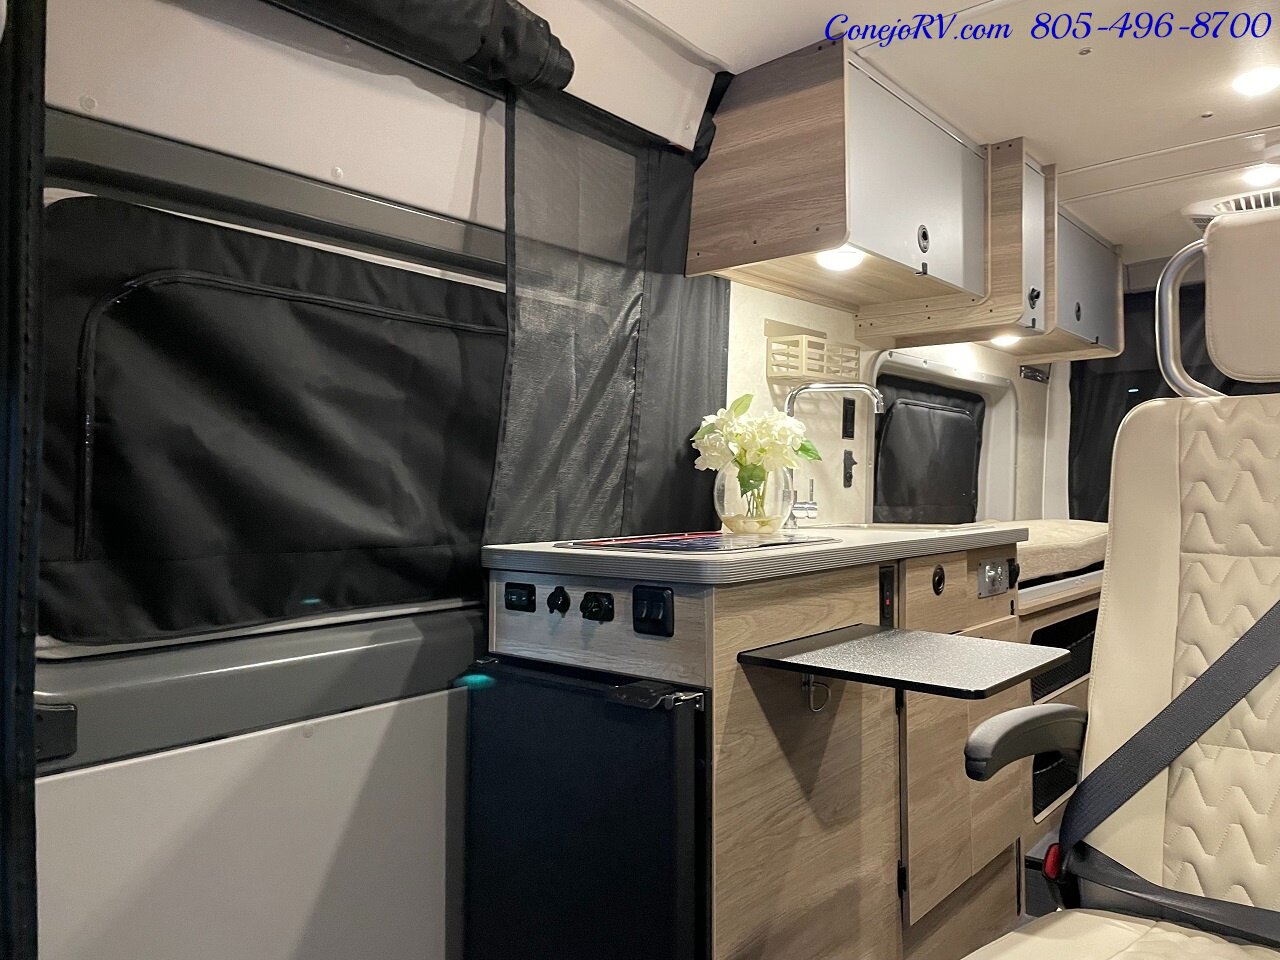 2023 WINNEBAGO Solis 59PX Murphy Bed Pop Top Full Galley New Chassis   - Photo 7 - Thousand Oaks, CA 91360